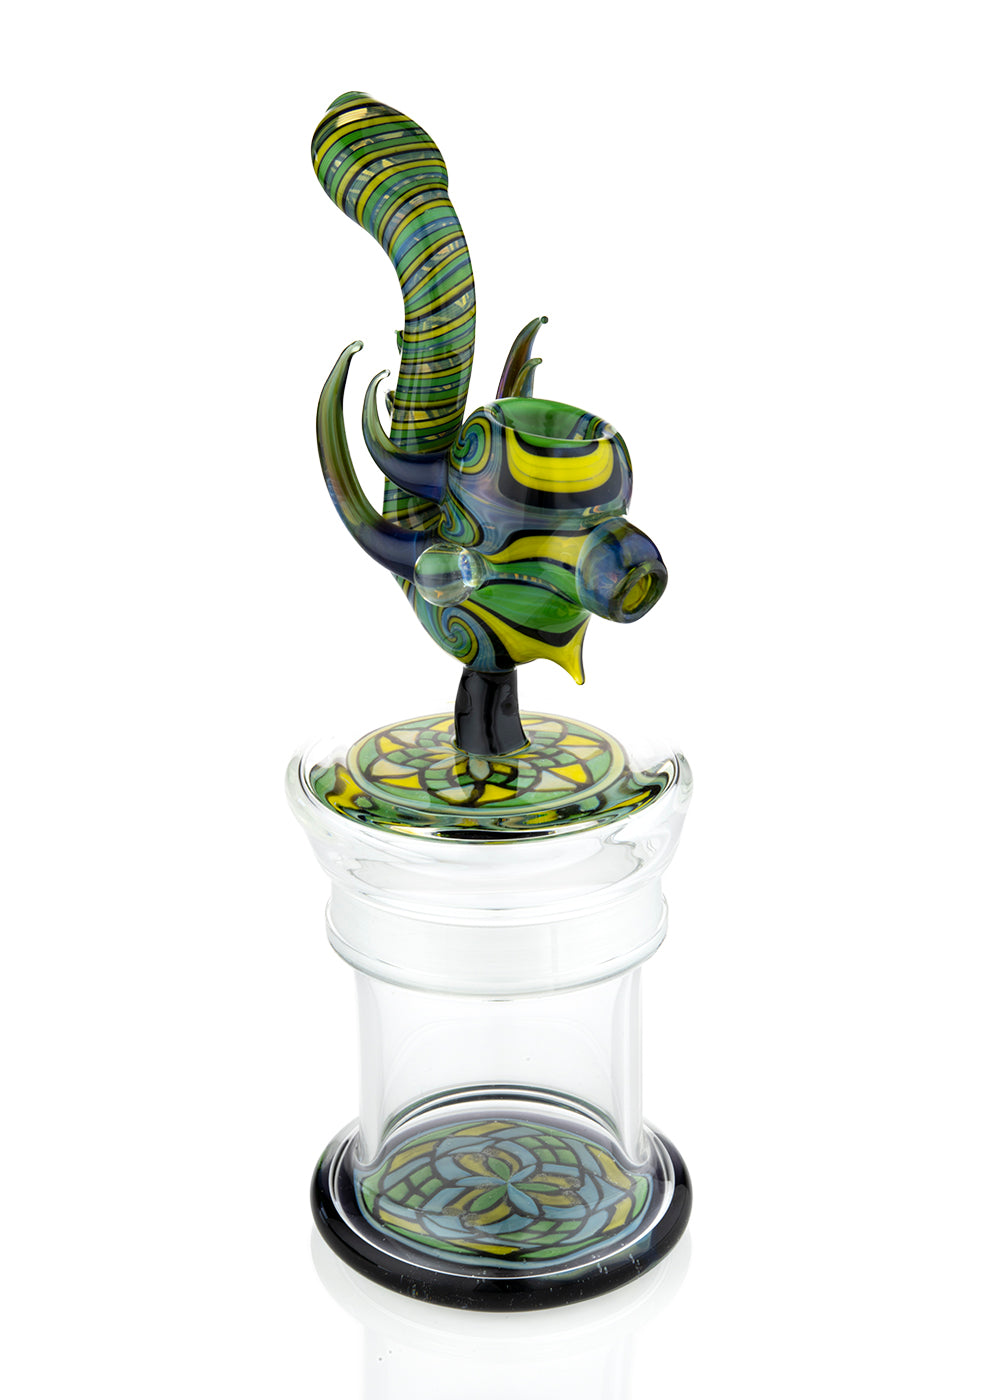 Custom Small Fillacello Jar with Removable Sectional Sherlock Lid in Green and Yellow